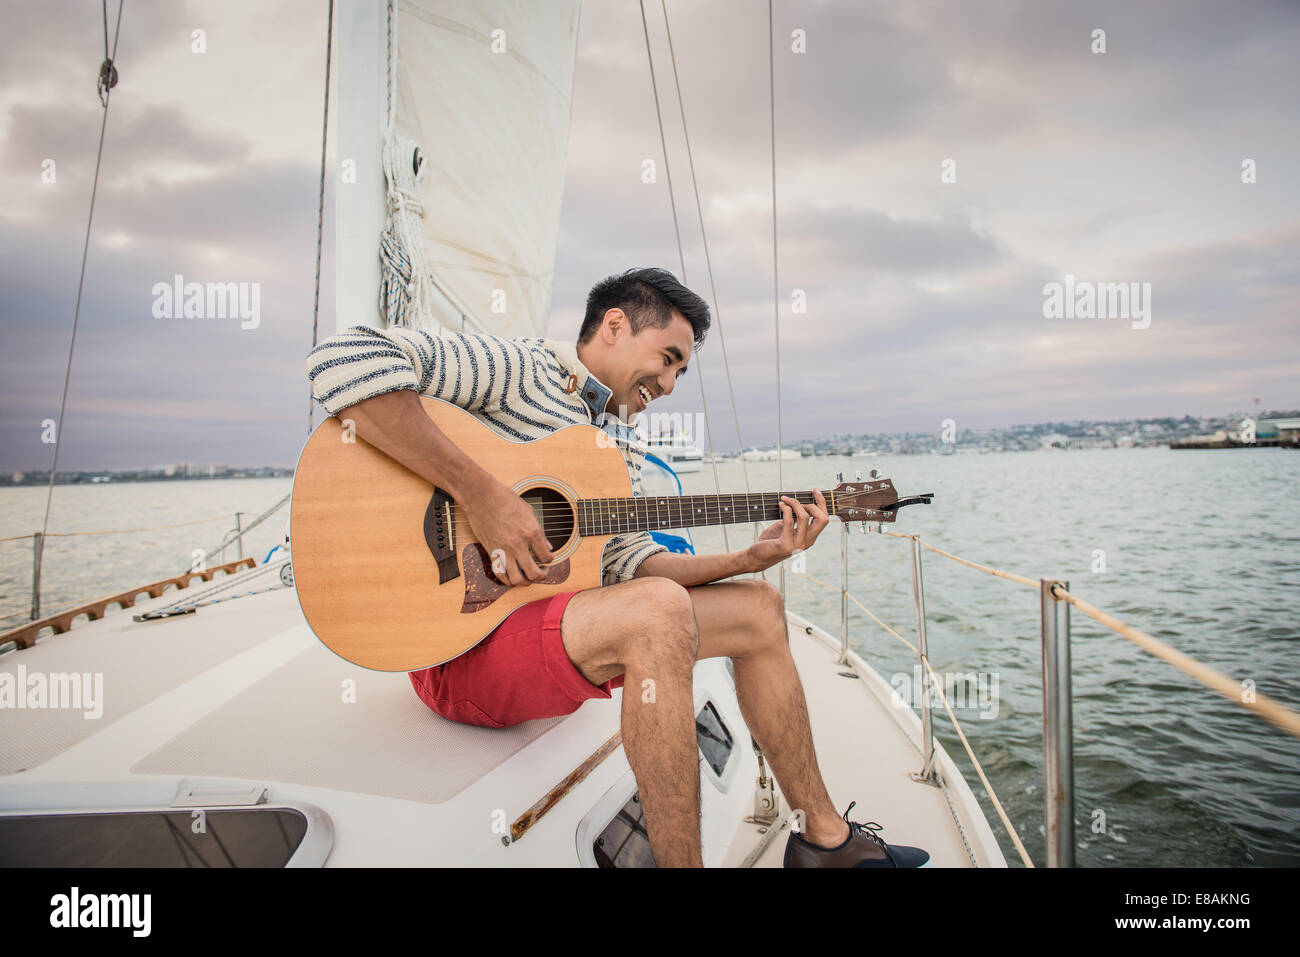 Young man on sailing boat playing guitar Stock Photo